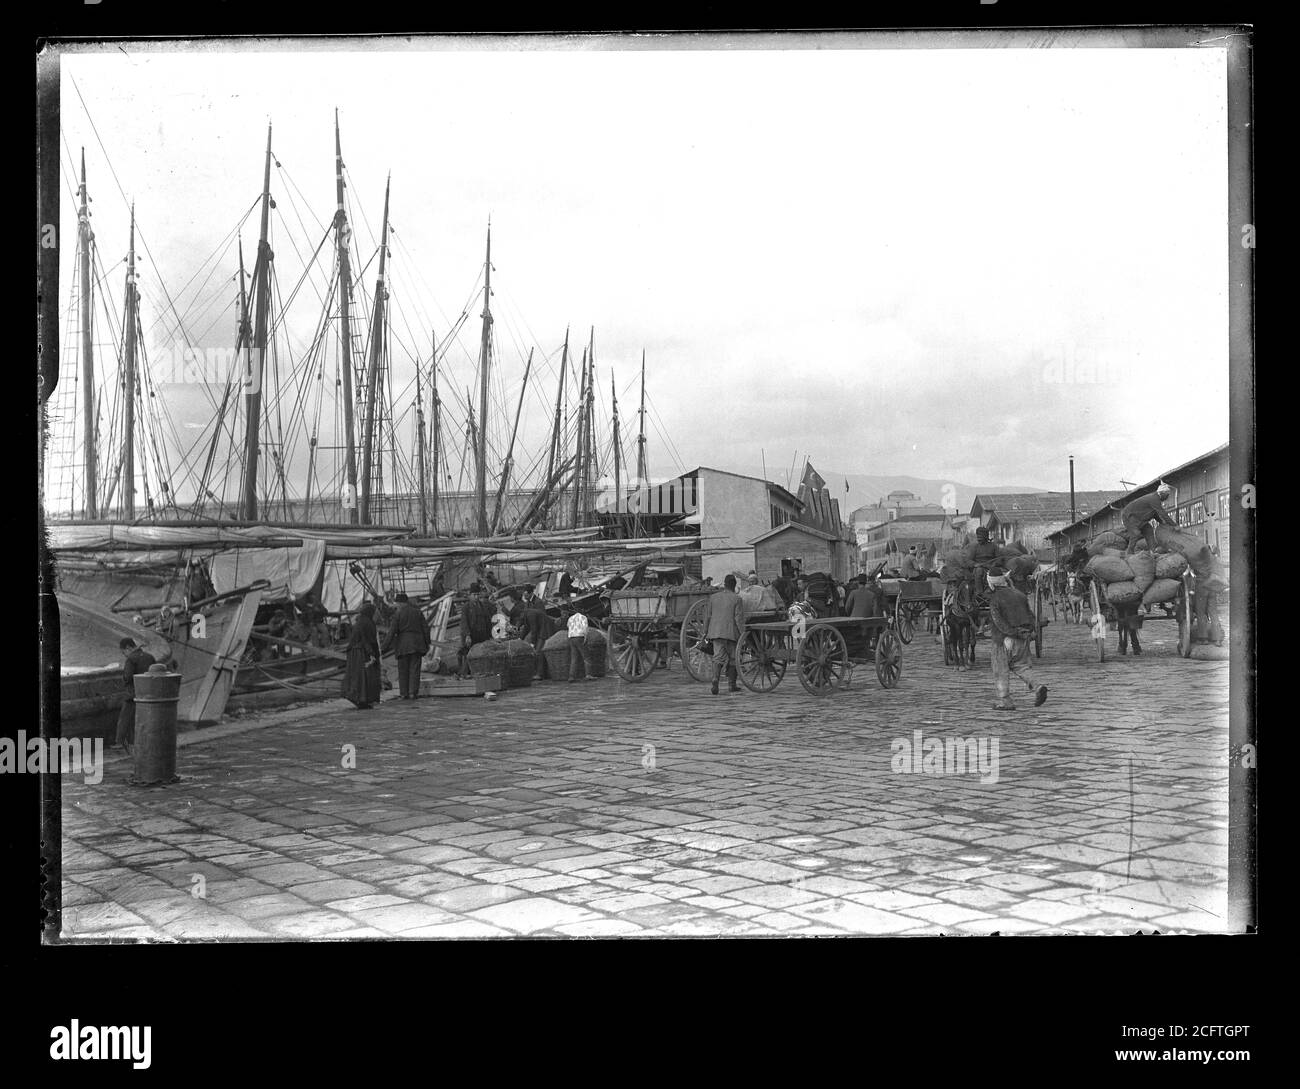 Smyrna Izmir Port transportation of goods. Photograph on dry glass plate from the Herry W. Schaefer collection, around 1910. Stock Photo